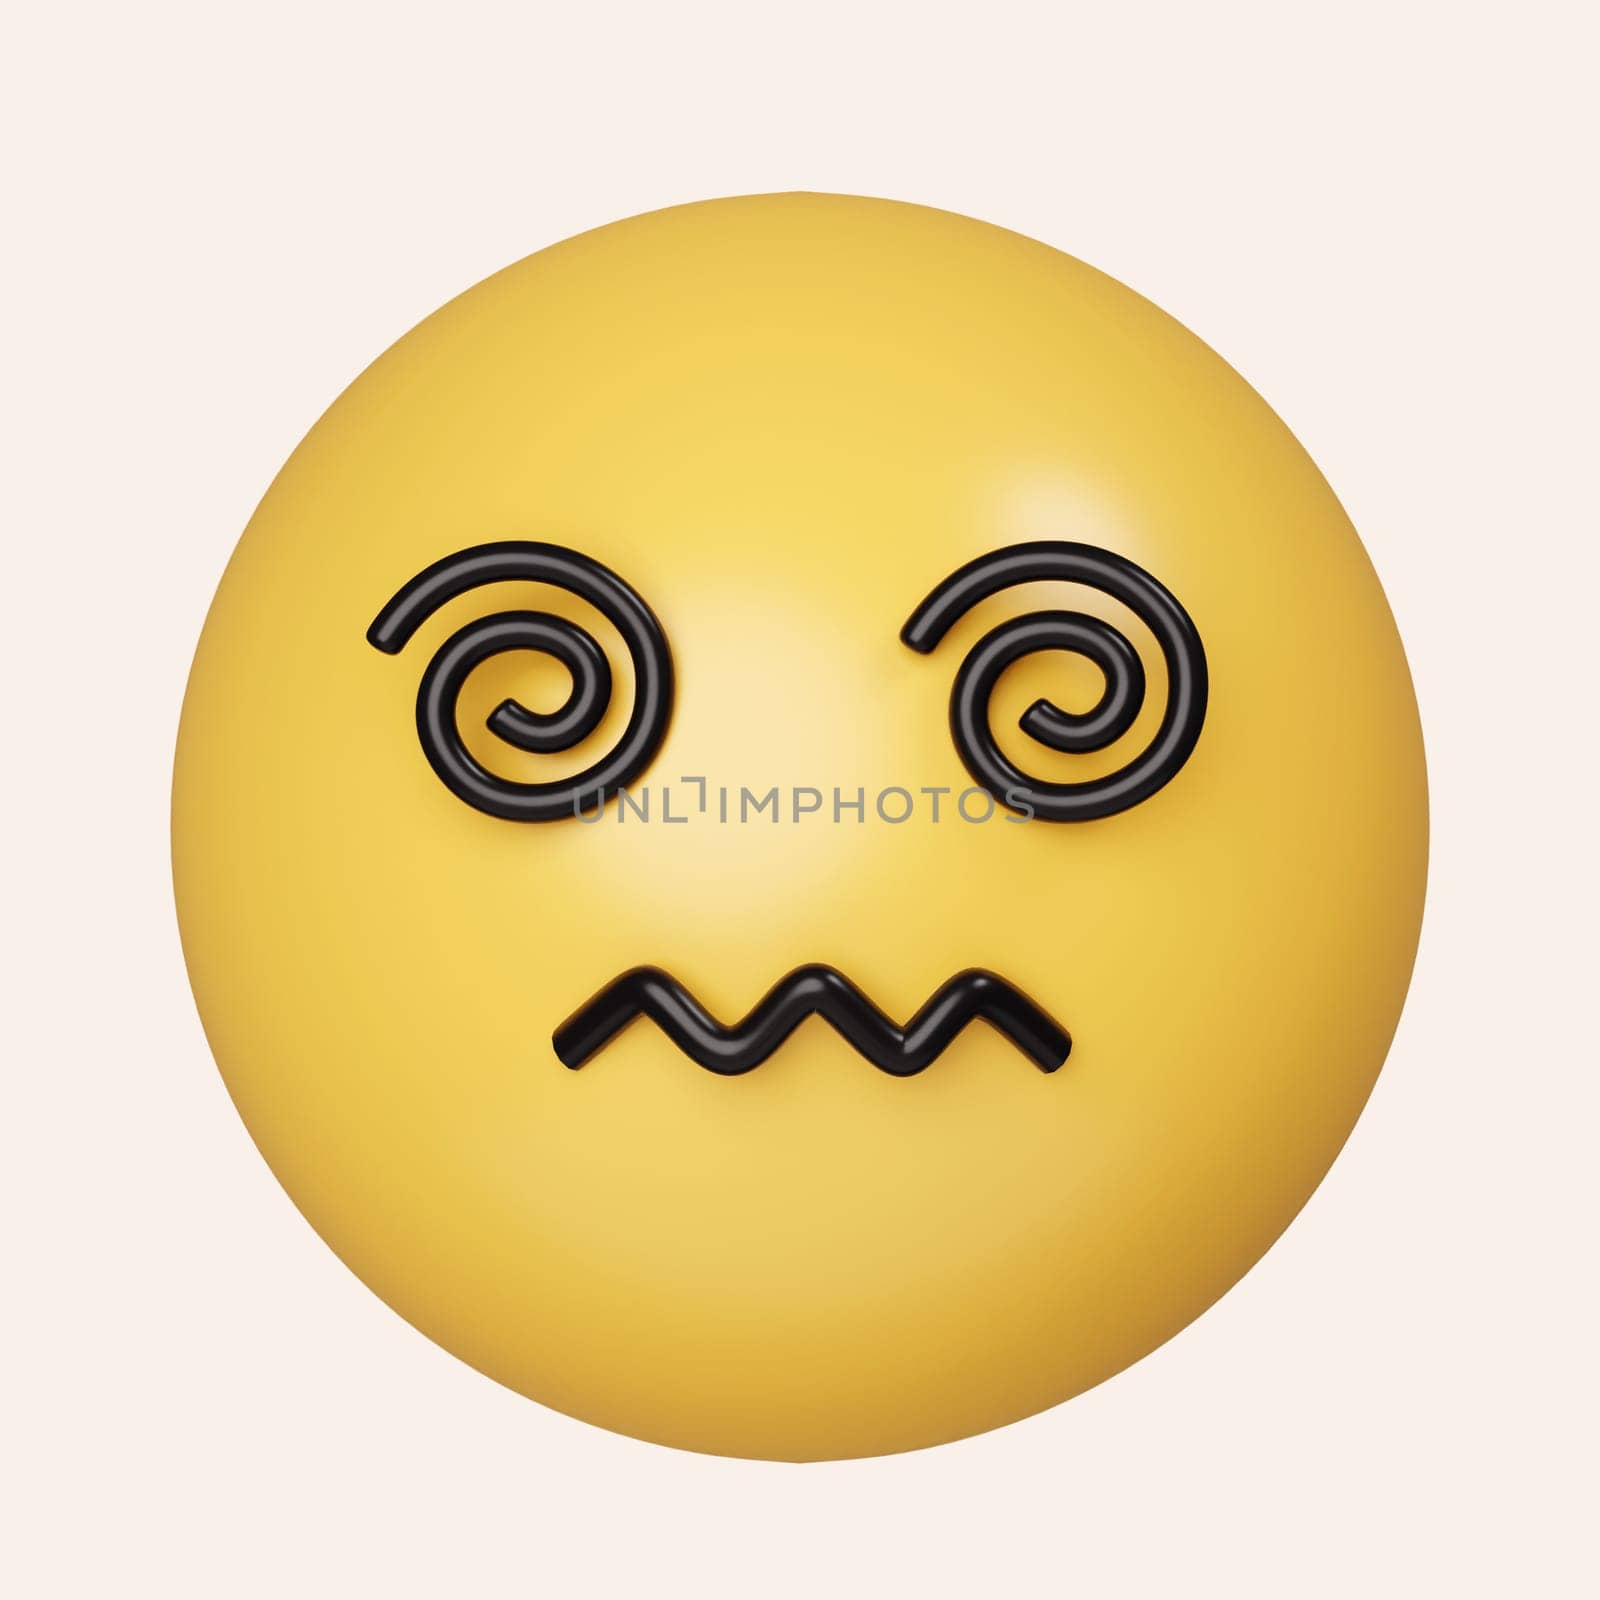 3d Nauseated face emoji with yellow face. sickly face green with concerned eyes and puffed holding back vomit. icon isolated on gray background. 3d rendering illustration. Clipping path. by meepiangraphic